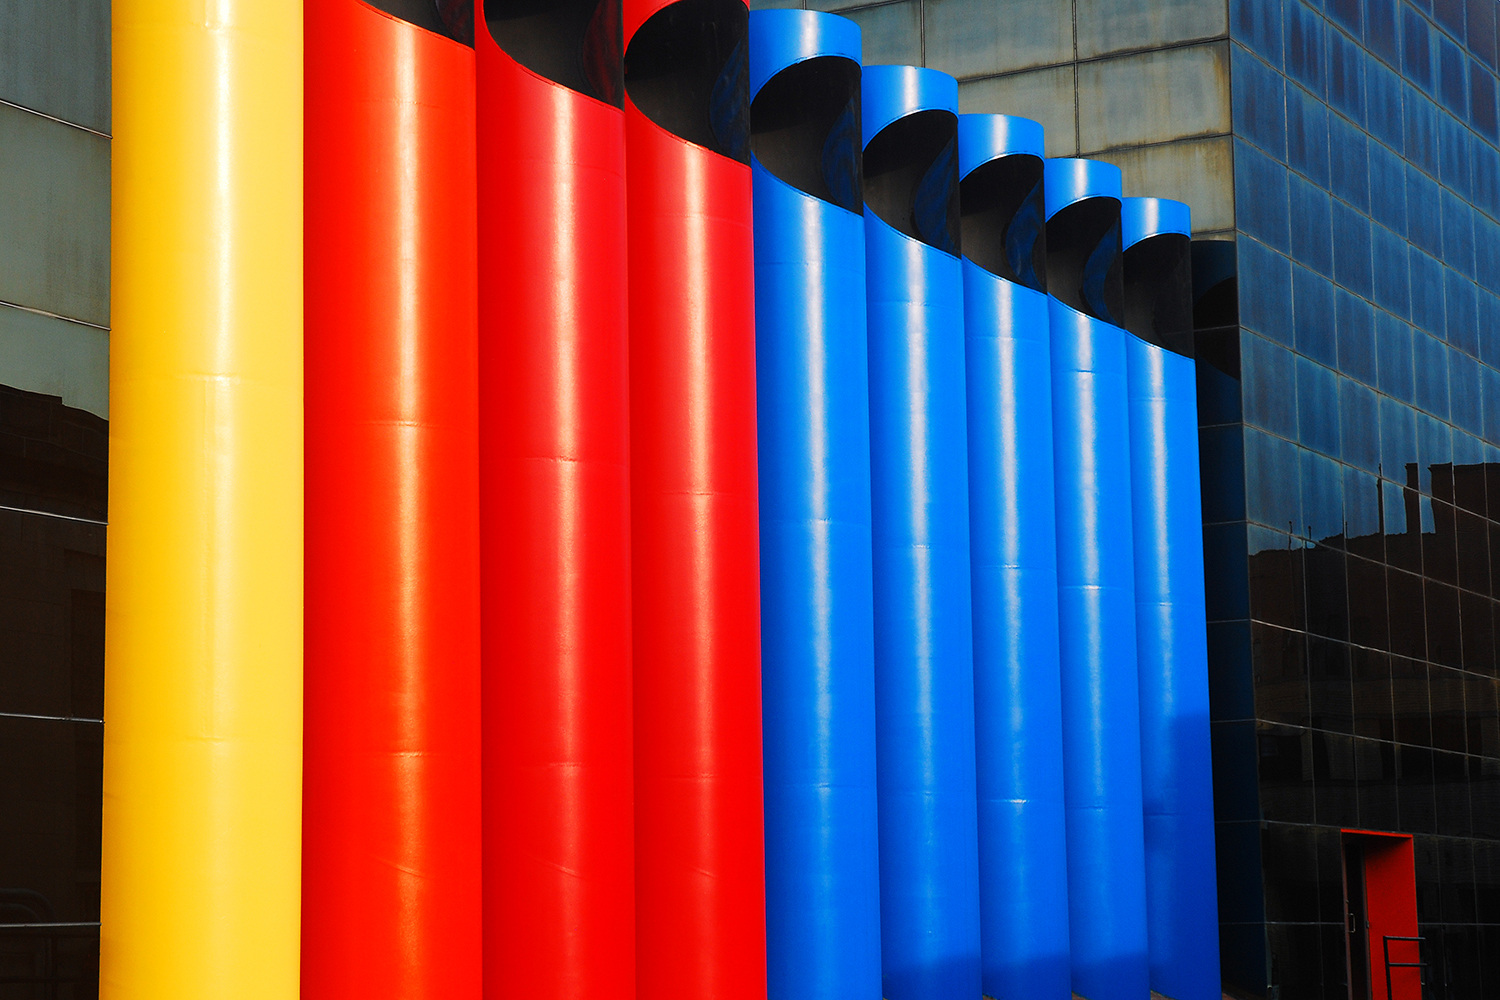 Colorful sculpture of exhaust pipes in primary colors.